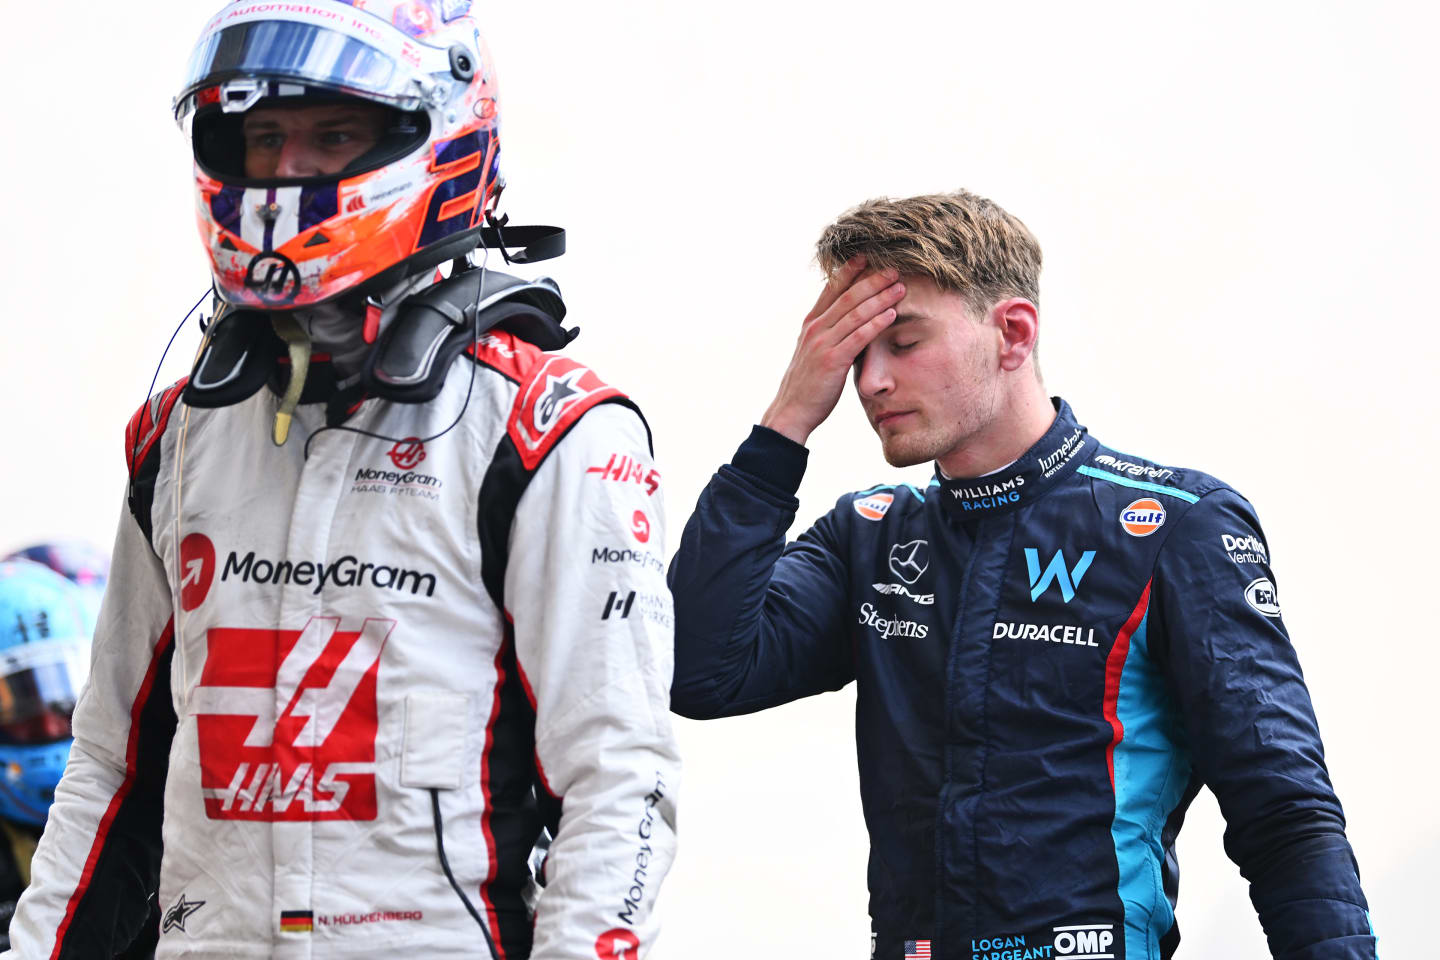 SPA, BELGIUM - JULY 30: 17th placed Logan Sargeant of United States and Williams reacts following